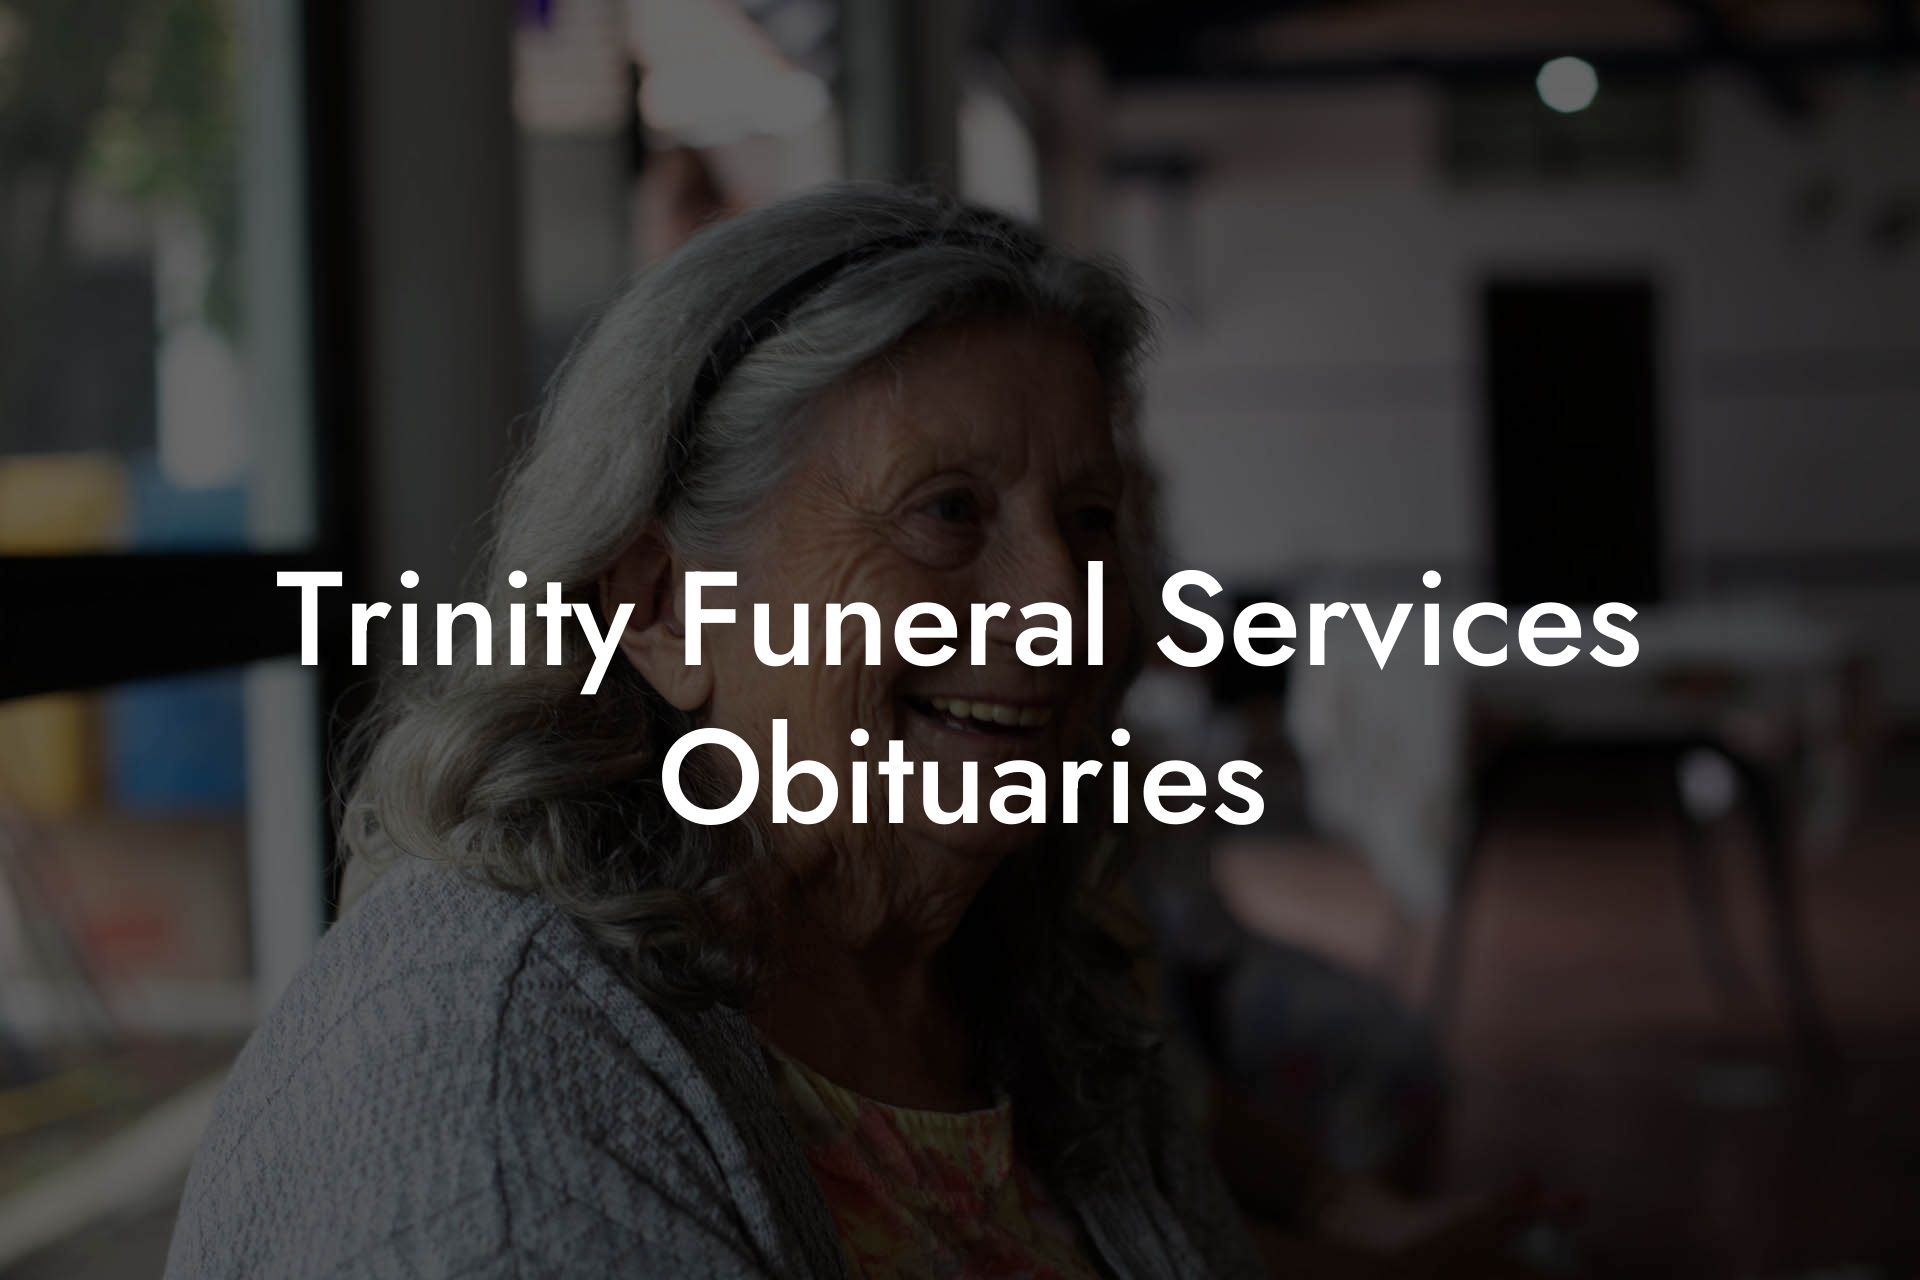 Trinity Funeral Services Obituaries